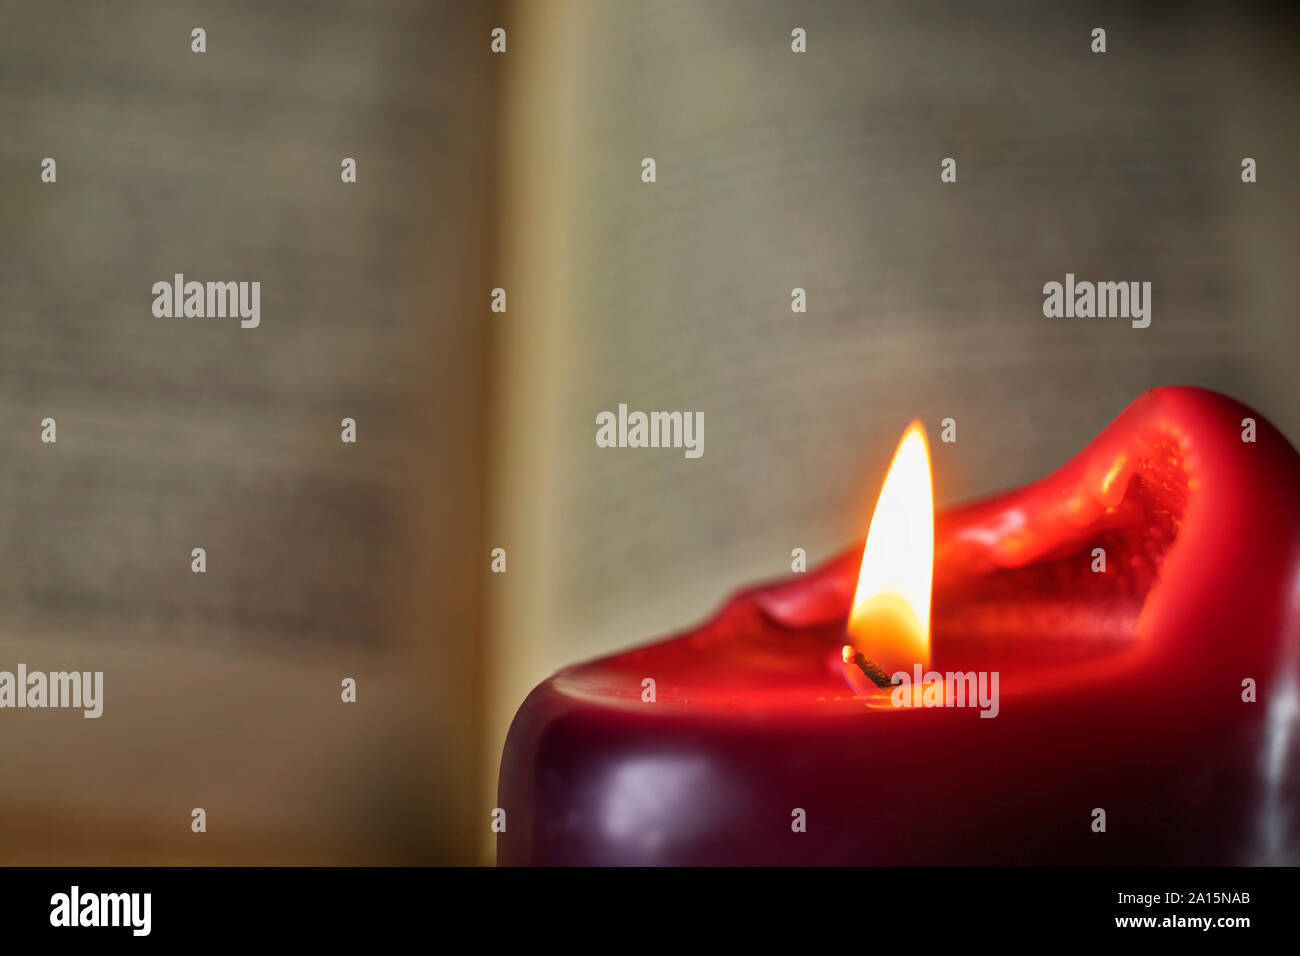 Reading under lighted candle , in the foreground one red candle ,in the background an opened book out of focus Stock Photo